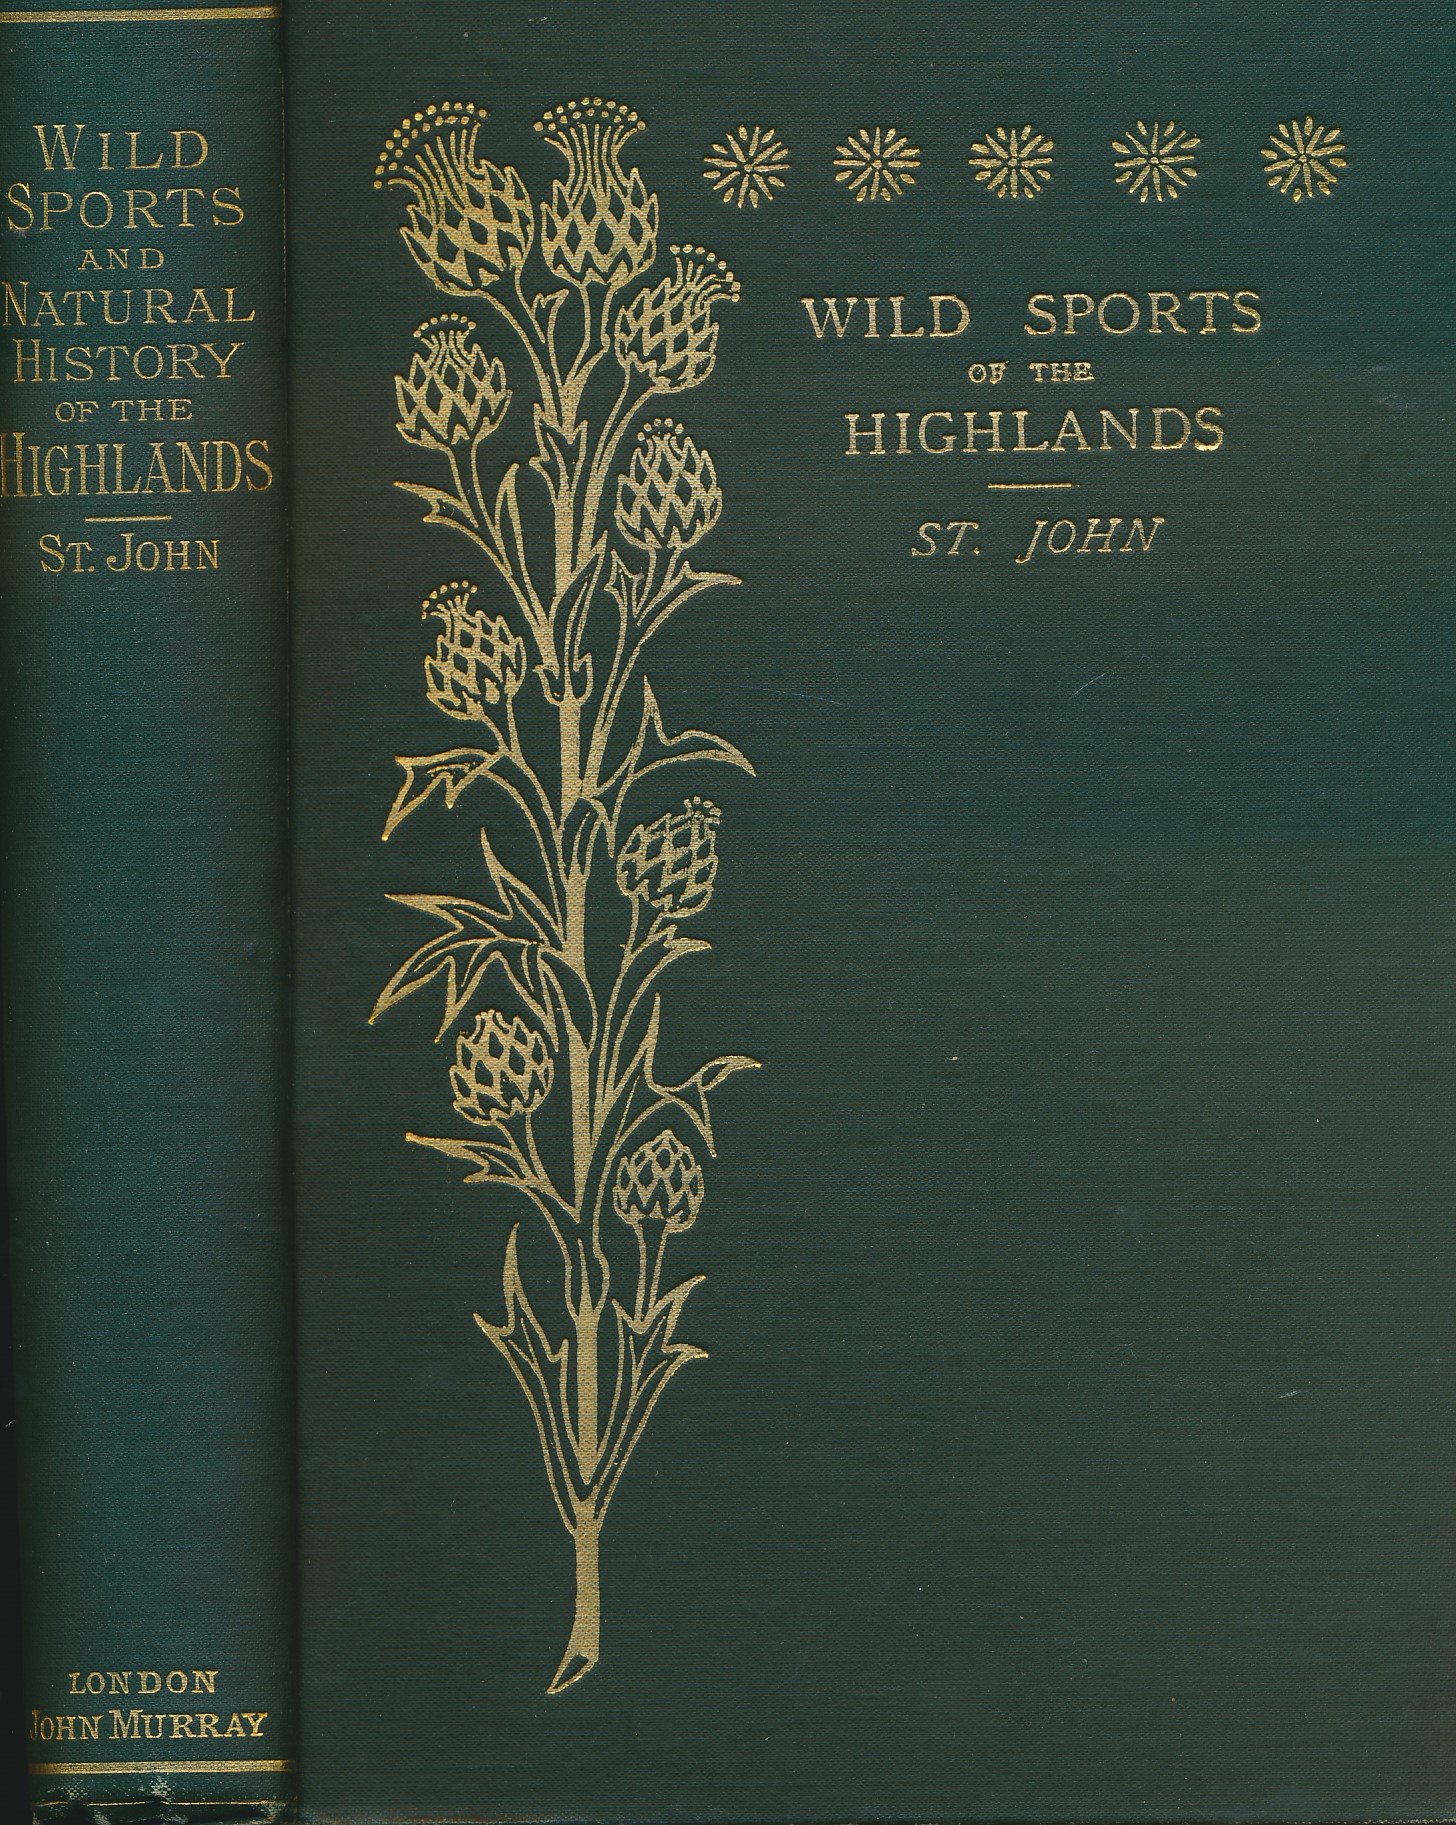 Short Sketches of the Wild Sports & Natural History of the Highlands. 1893.